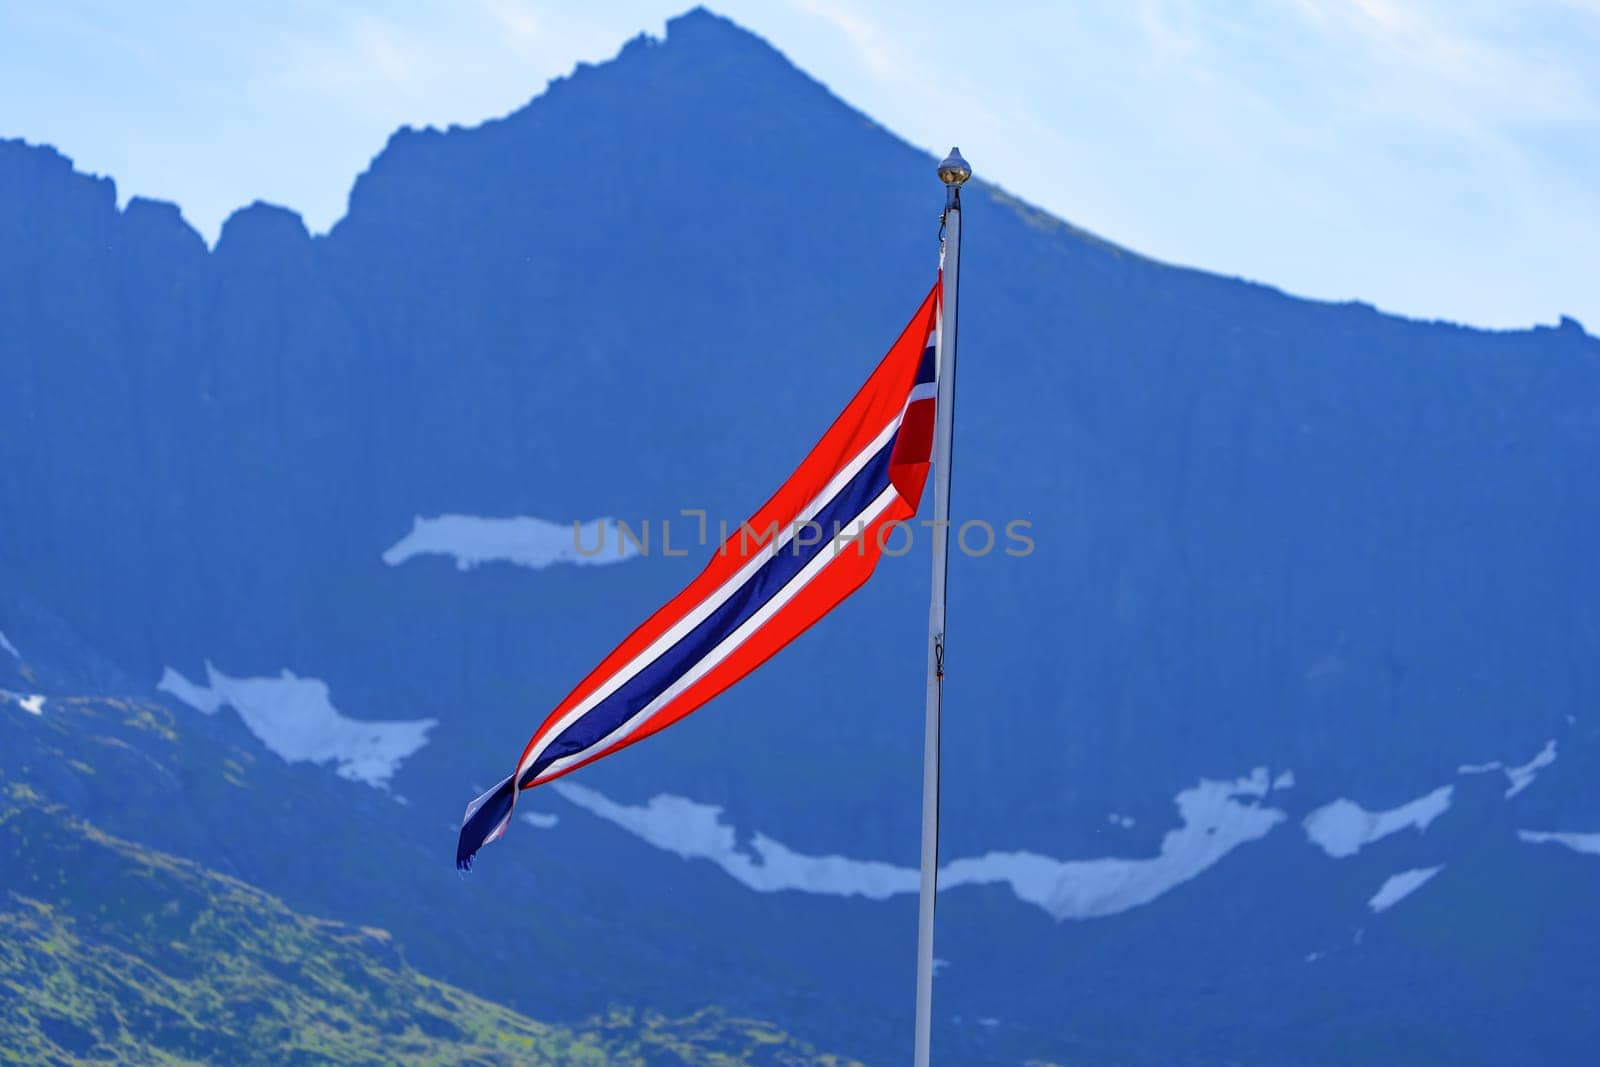 A breathtaking scenic view of the Norwegian flag proudly waving against a backdrop of a majestic mountain range. The vibrant colors and stunning landscape capture the natural beauty of Norway.